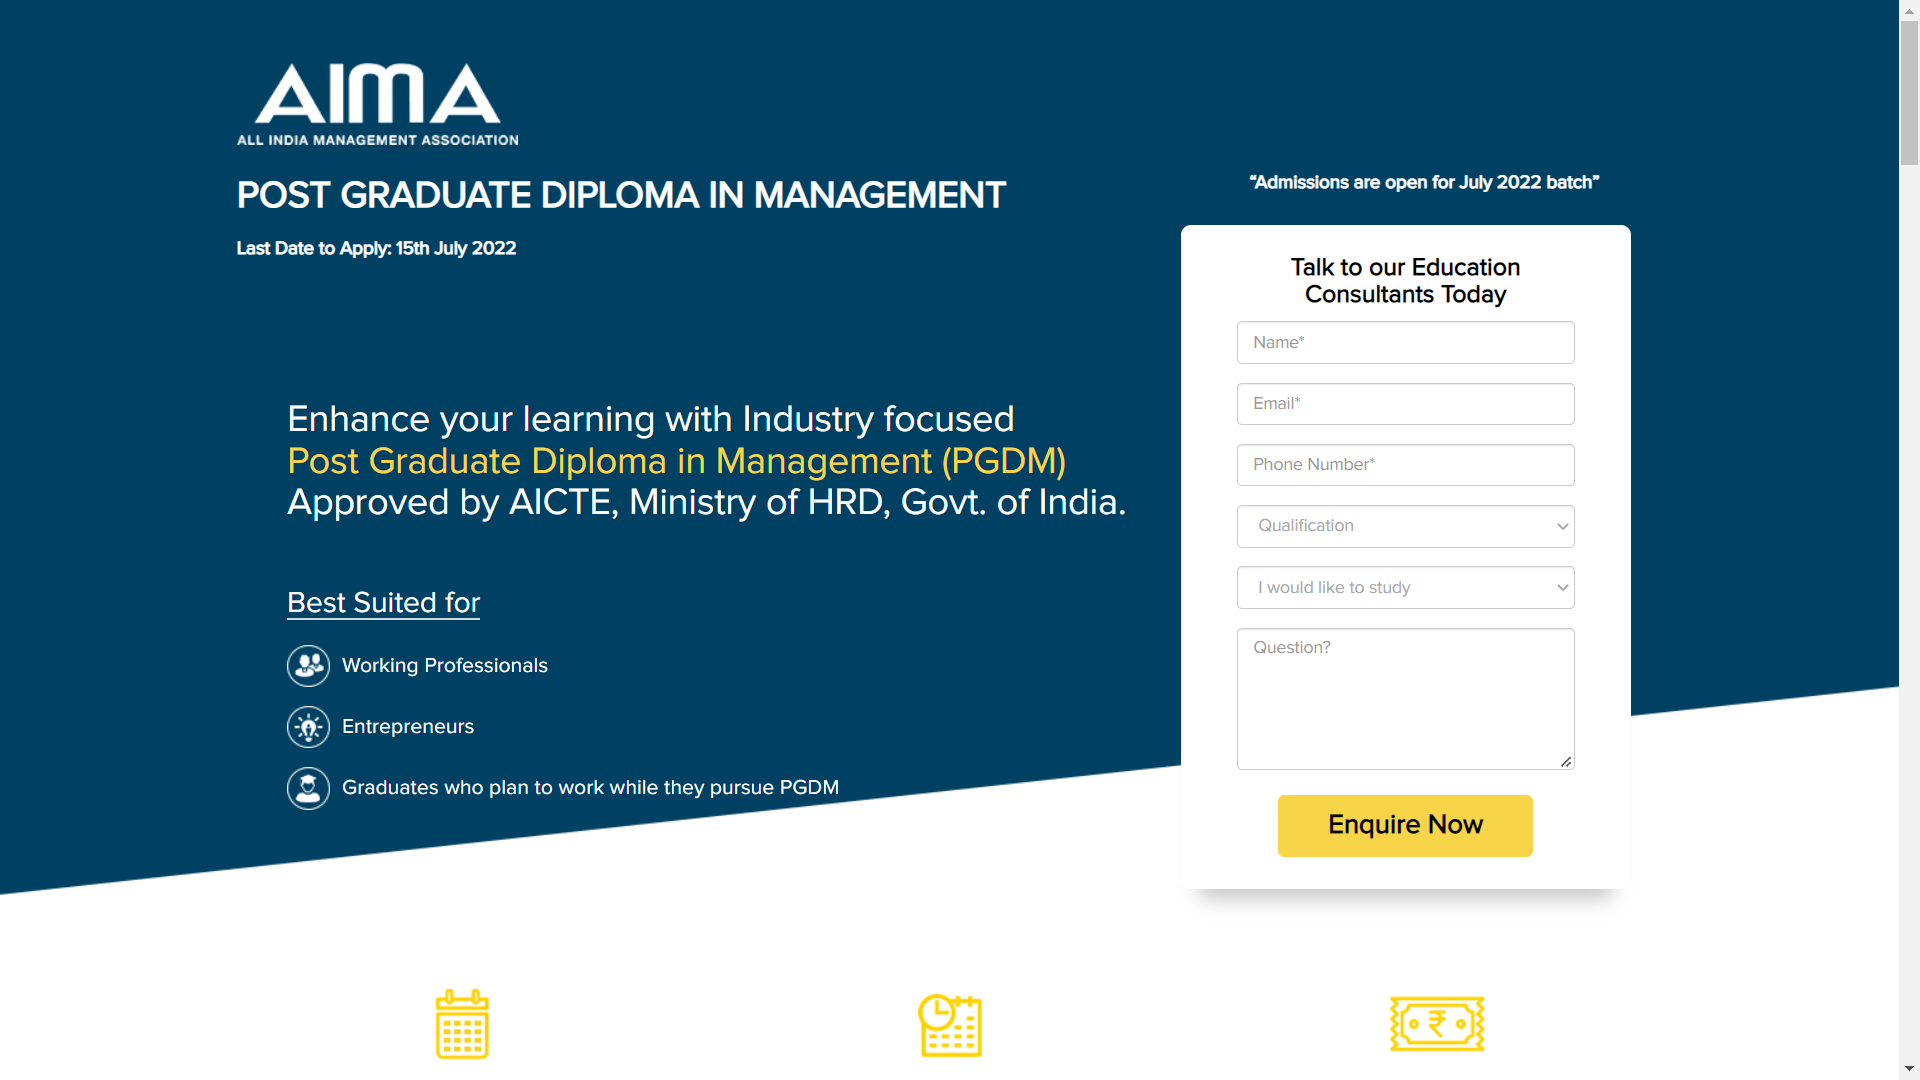 AIMA MAT 2022 Registration, Eligibility, Last Date and Application Fee